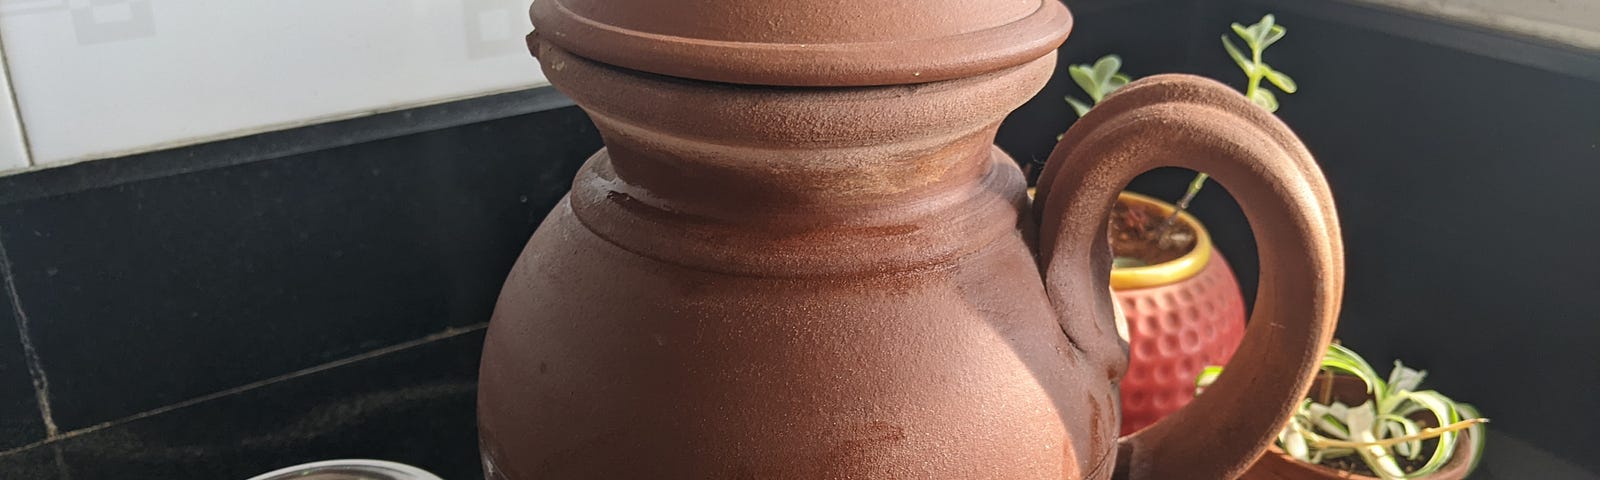 Earthern pot to keep water cool.